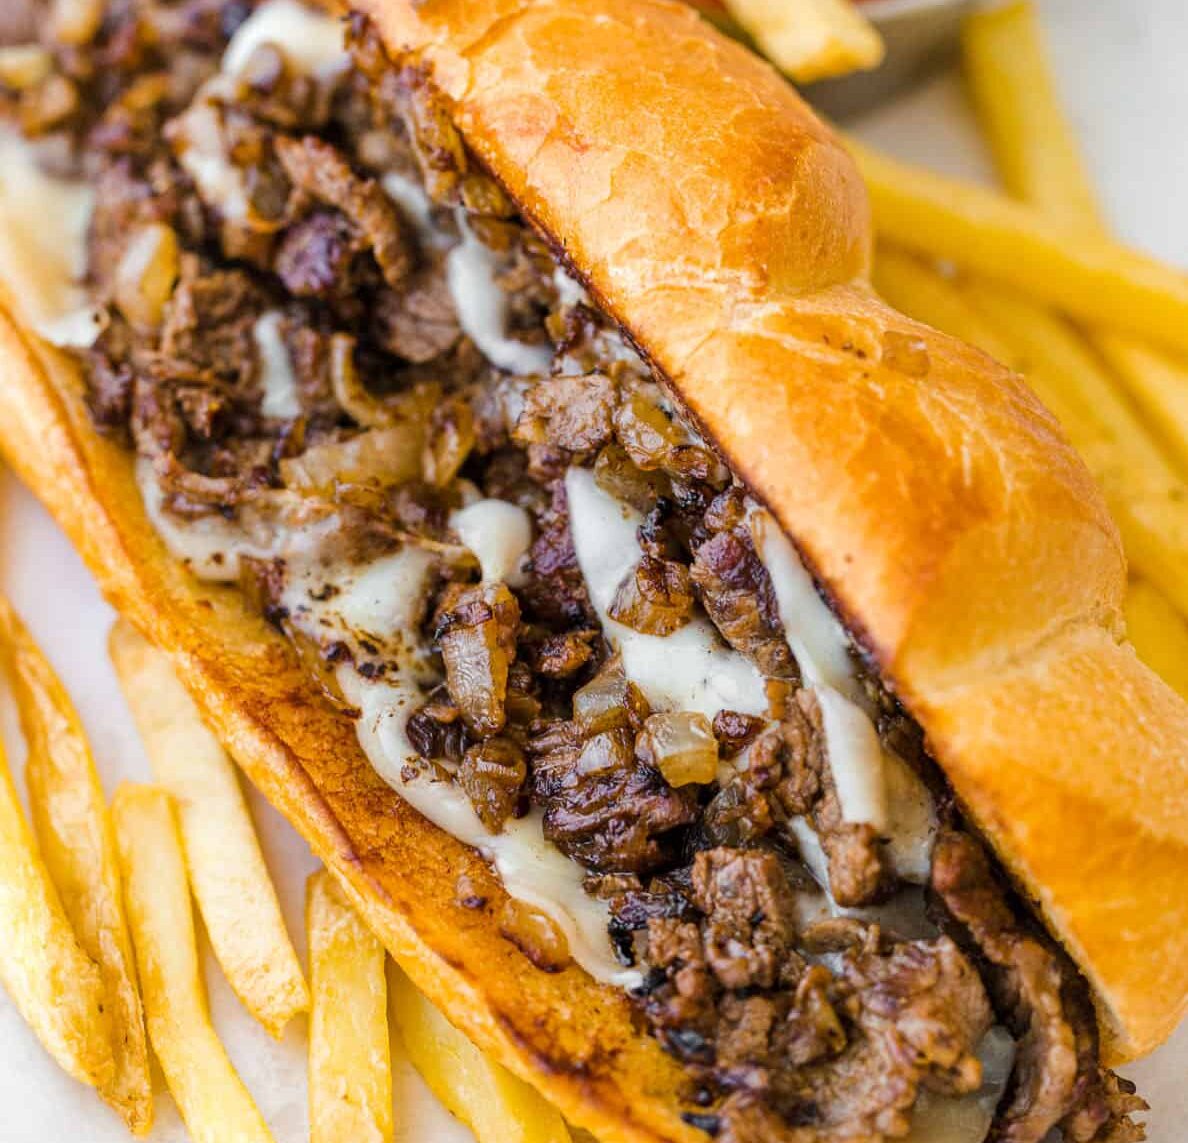 Quaker Valley Foods is Celebrating National Cheesesteak Day! Quaker